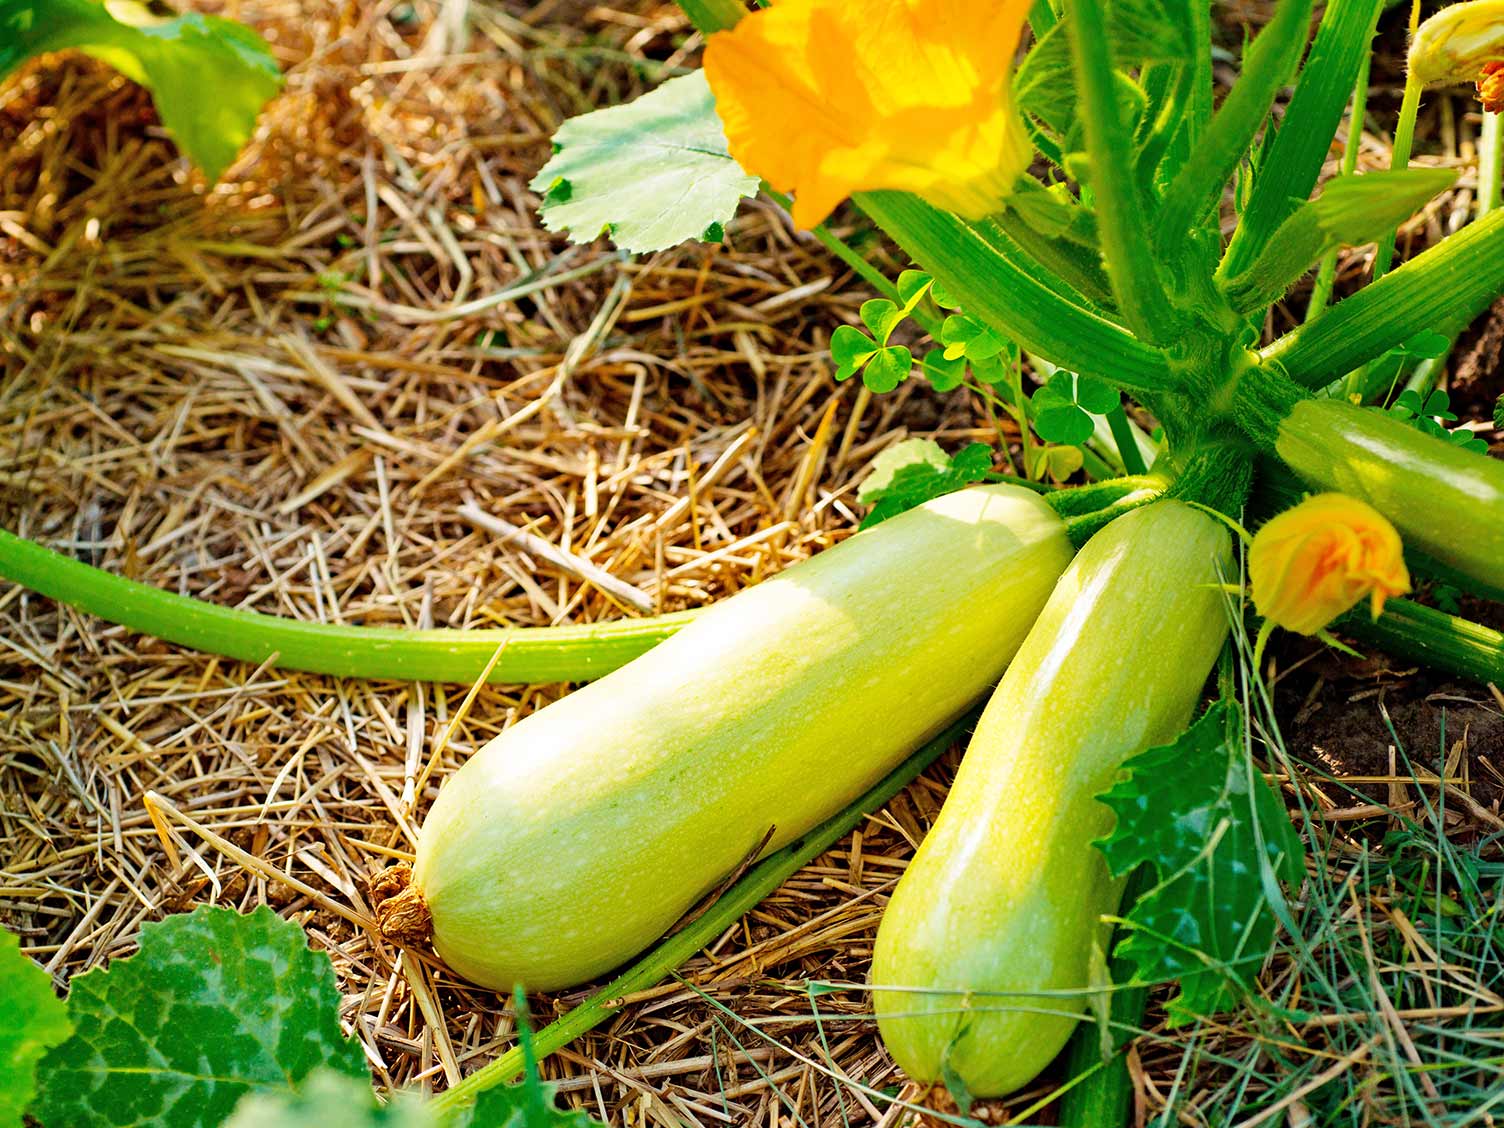 How To Grow Zucchini From Seed